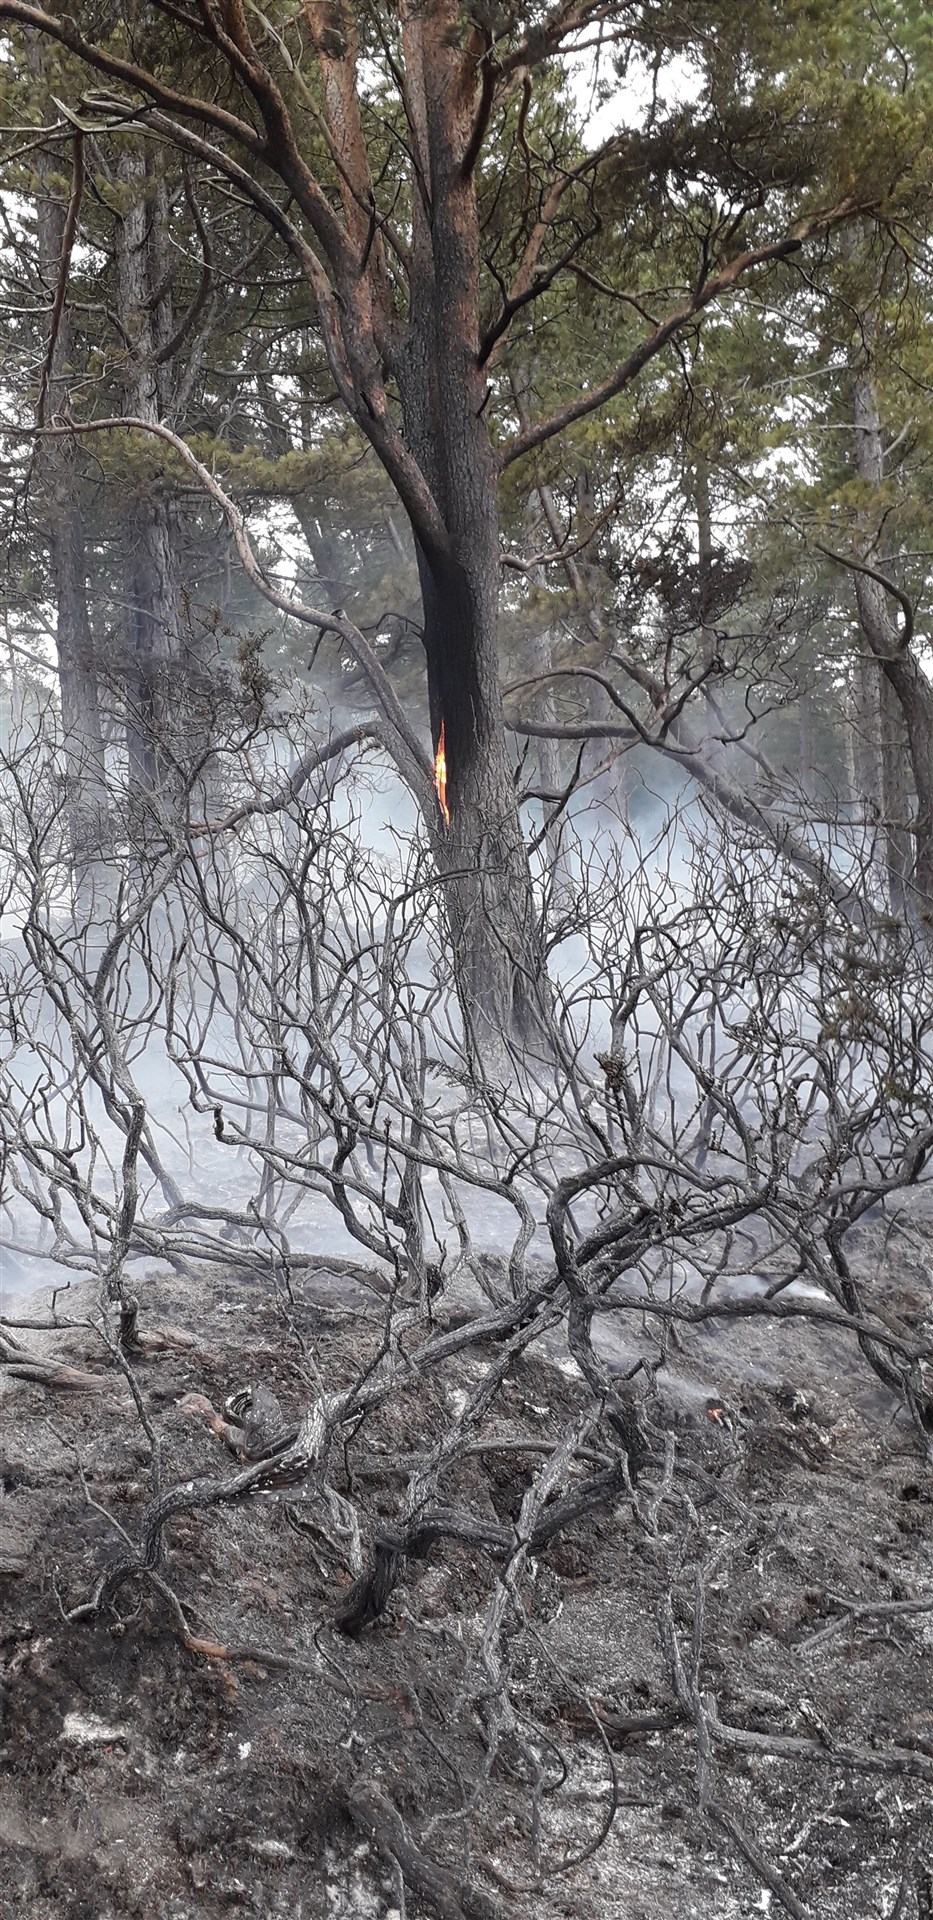 The fire swept through the trees and scrub aided by high winds.